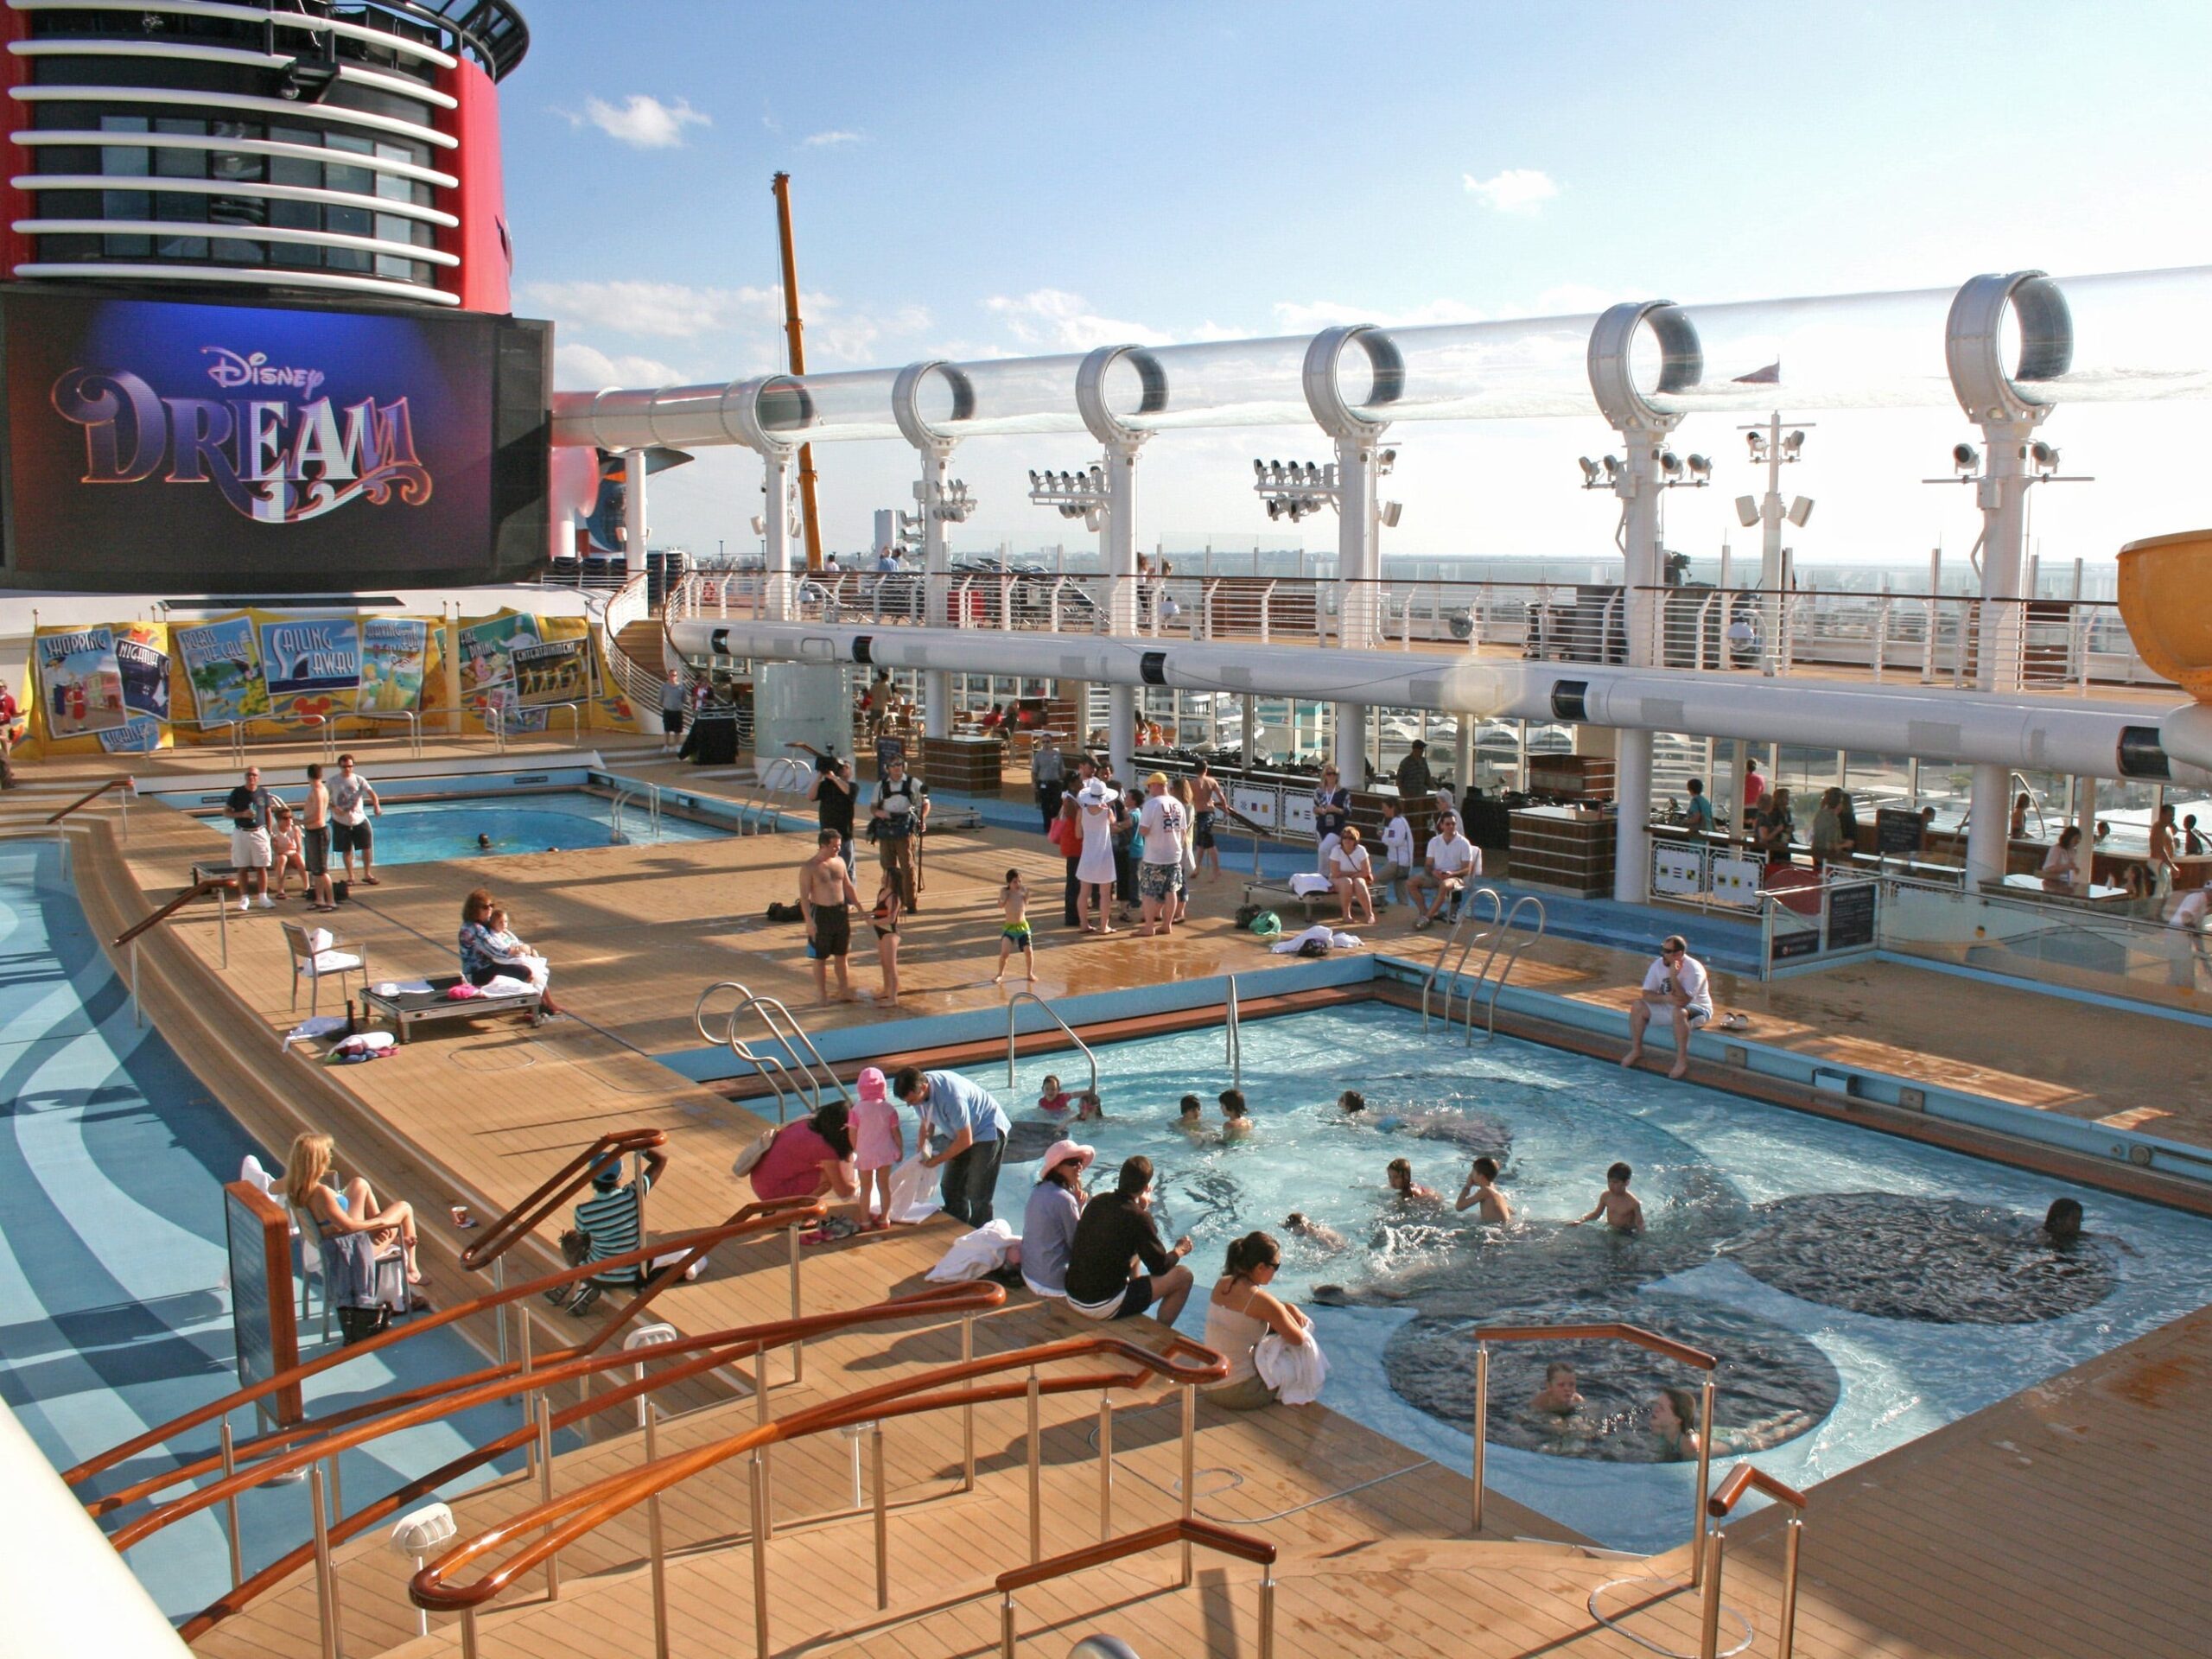 The Mickey Mouse Pool is one of the options available for water activities on the pool deck of the Disney Dream cruise ship.